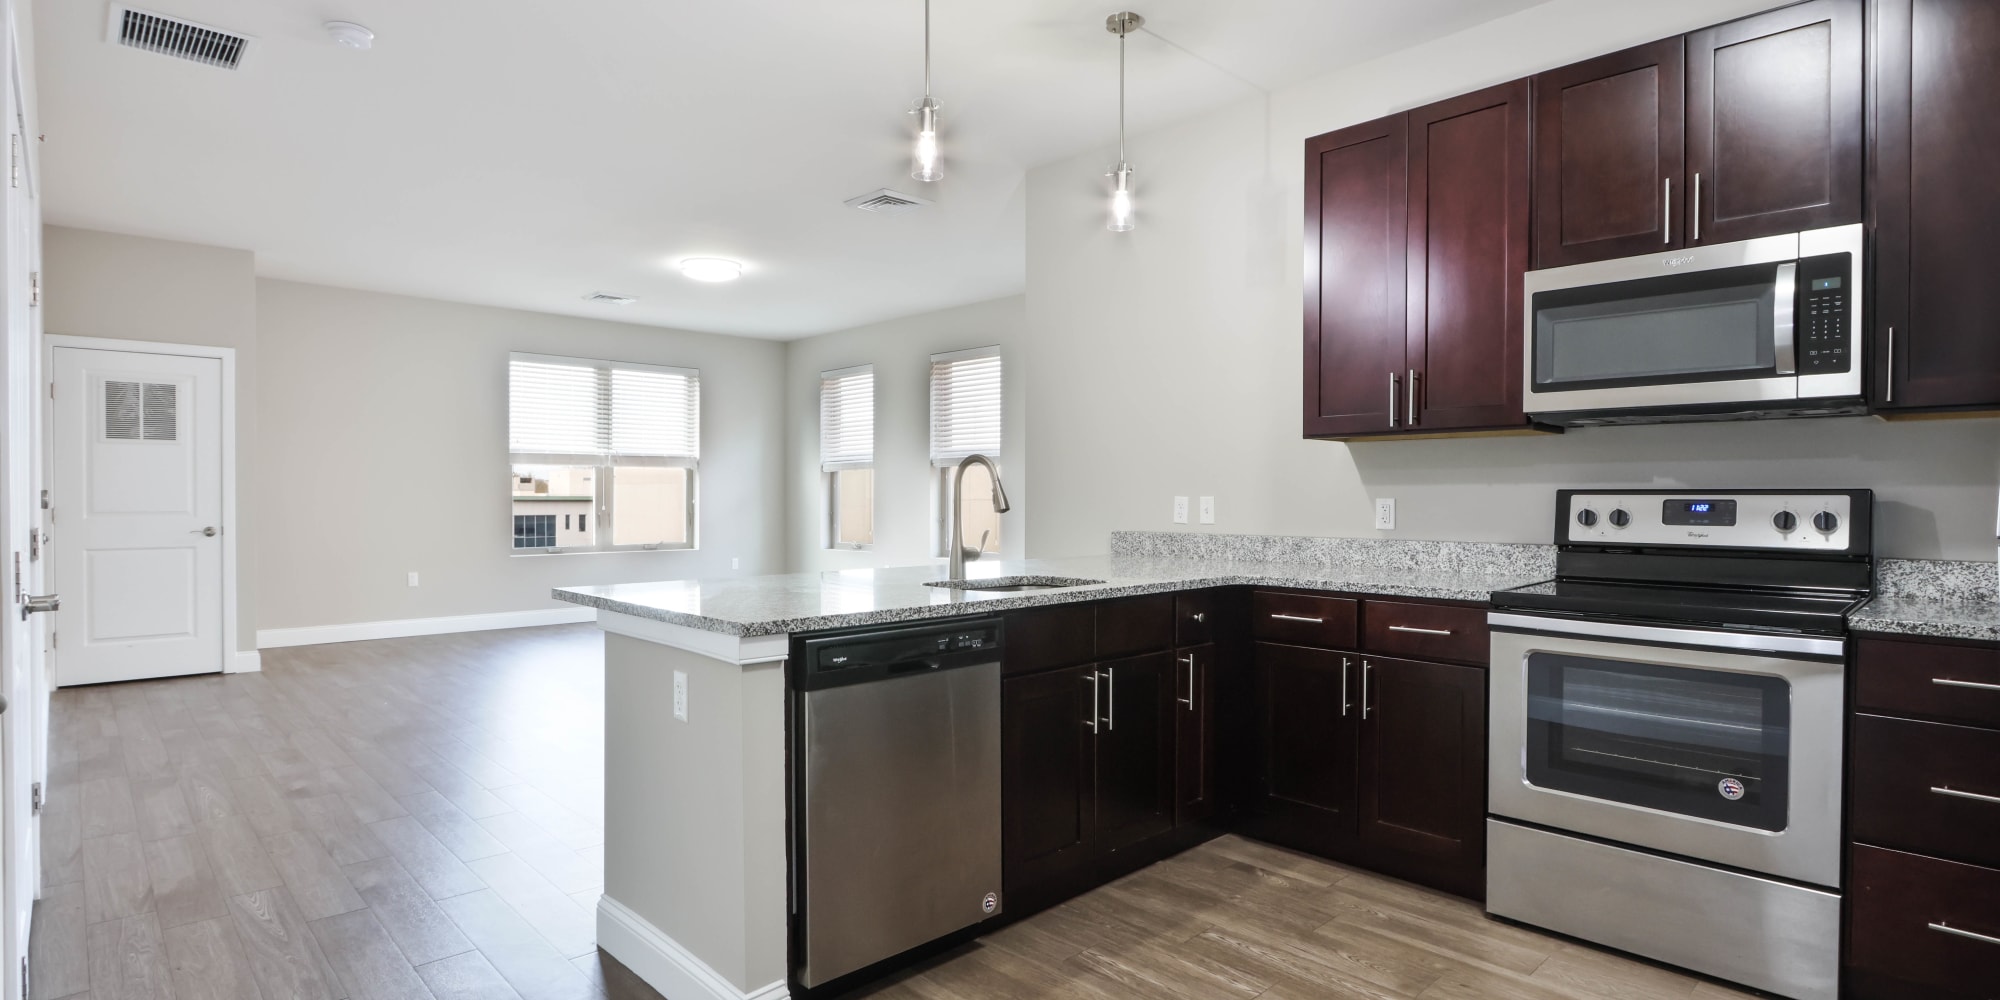 Spacious kitchen in a model home at Five 10 Flats in Bethlehem, Pennsylvania